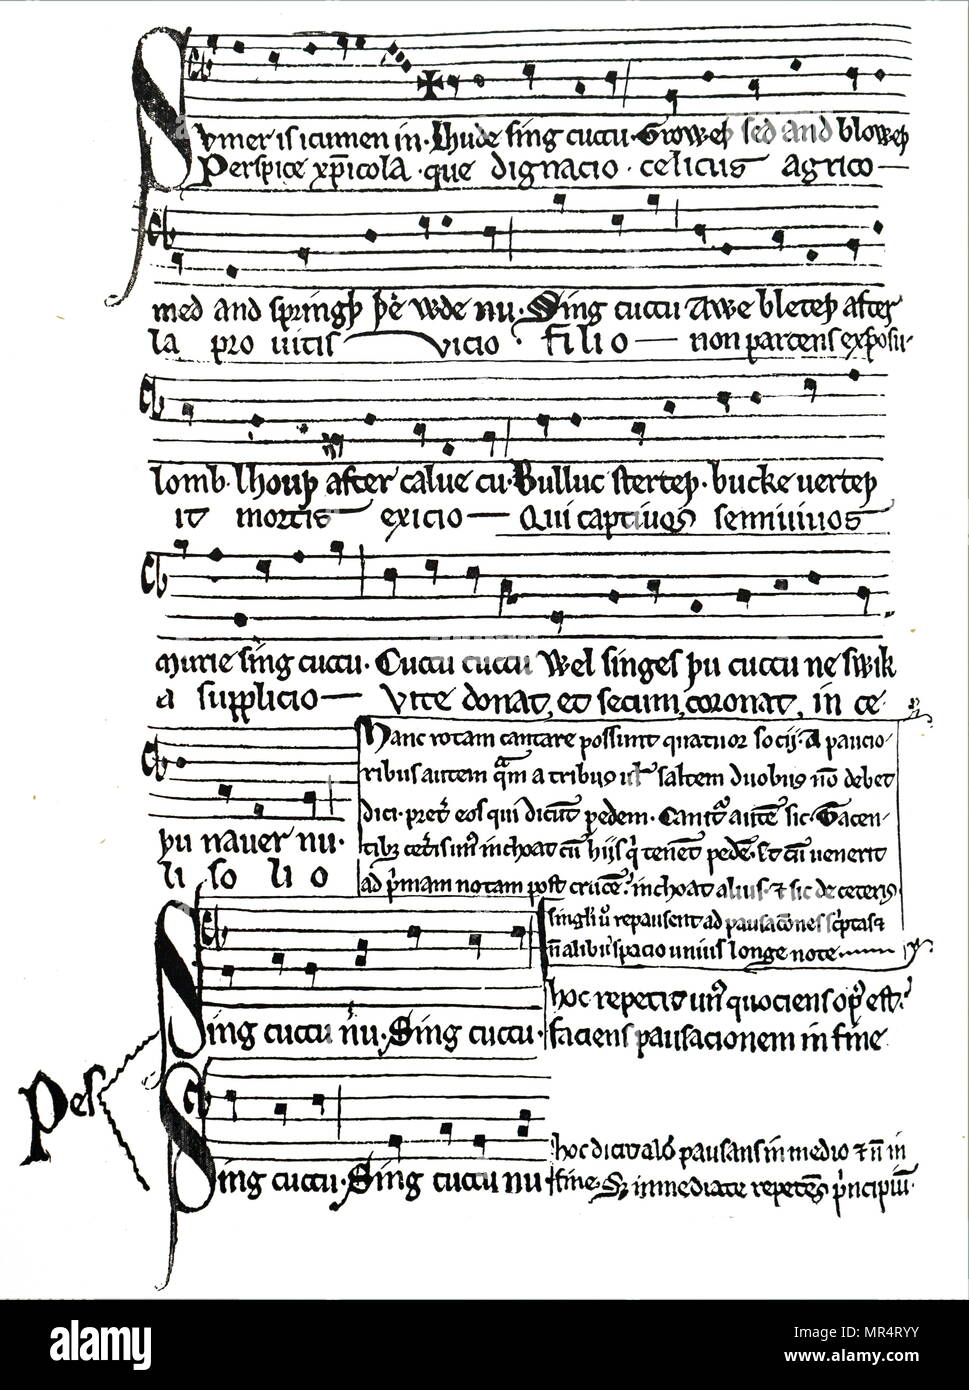 Sheet music for the song 'Summer is Y-comen In': a mid-13th century Old English song of Spring. Alternative Latin words of a devotional song are written under the Old English. Dated 13th century Stock Photo